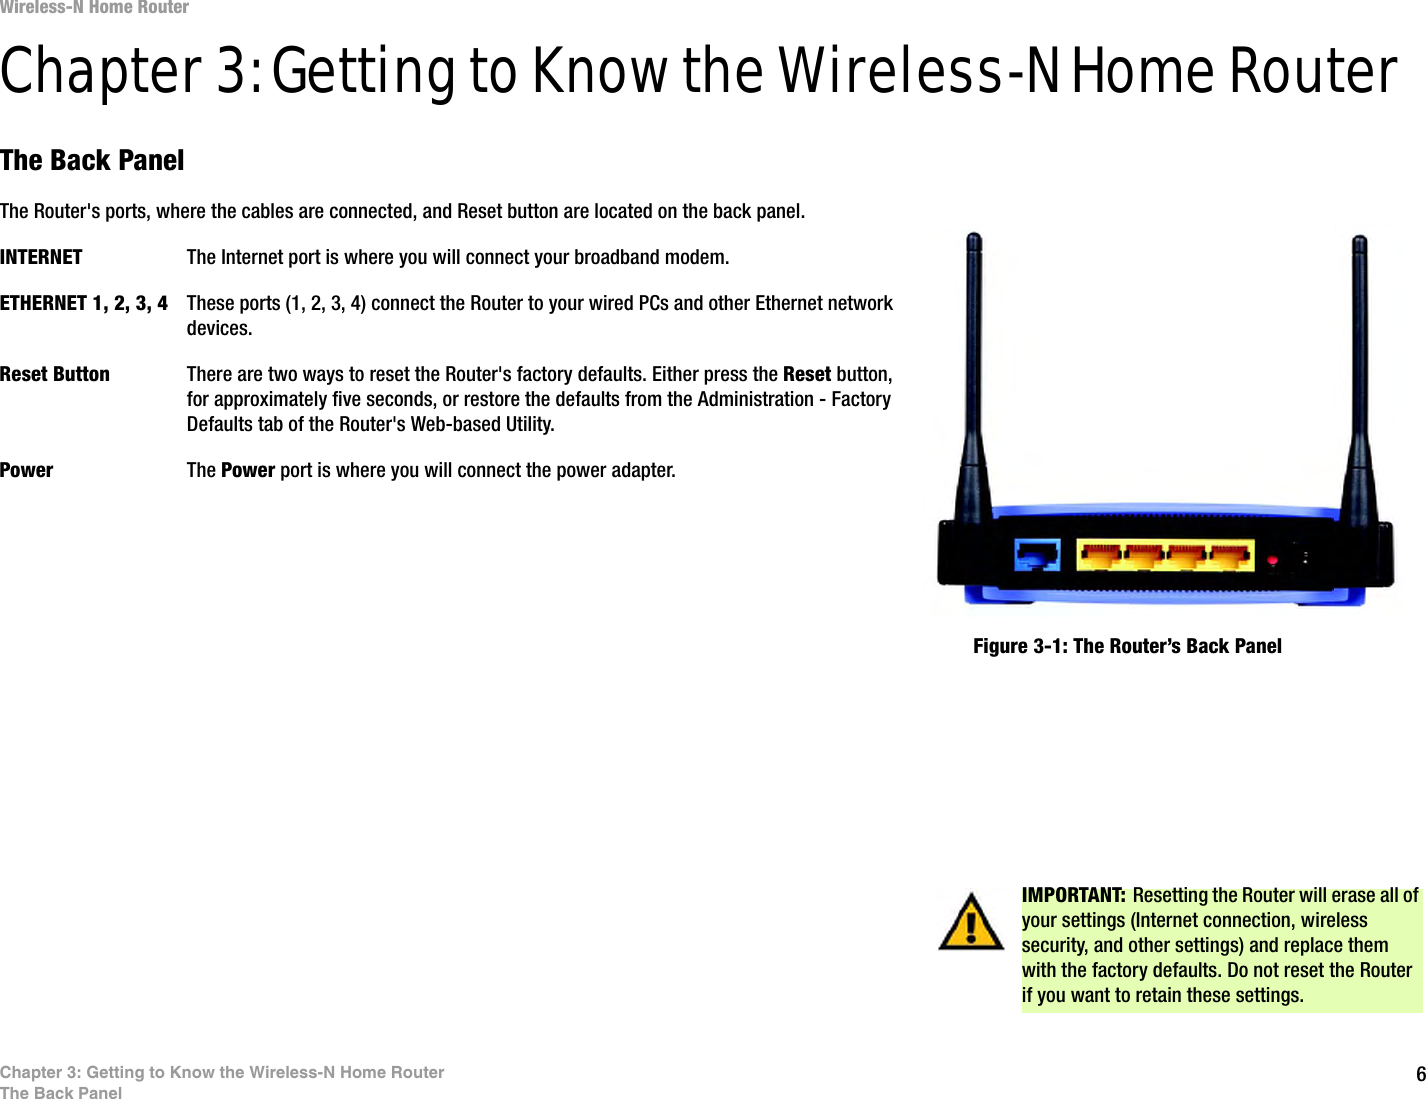 6Chapter 3: Getting to Know the Wireless-N Home RouterThe Back PanelWireless-N Home RouterChapter 3: Getting to Know the Wireless-N Home RouterThe Back PanelThe Router&apos;s ports, where the cables are connected, and Reset button are located on the back panel.INTERNET The Internet port is where you will connect your broadband modem.ETHERNET 1, 2, 3, 4 These ports (1, 2, 3, 4) connect the Router to your wired PCs and other Ethernet network devices.Reset Button There are two ways to reset the Router&apos;s factory defaults. Either press the Reset button, for approximately five seconds, or restore the defaults from the Administration - Factory Defaults tab of the Router&apos;s Web-based Utility.Power The Power port is where you will connect the power adapter.IMPORTANT: Resetting the Router will erase all of your settings (Internet connection, wireless security, and other settings) and replace them with the factory defaults. Do not reset the Router if you want to retain these settings.Figure 3-1: The Router’s Back Panel